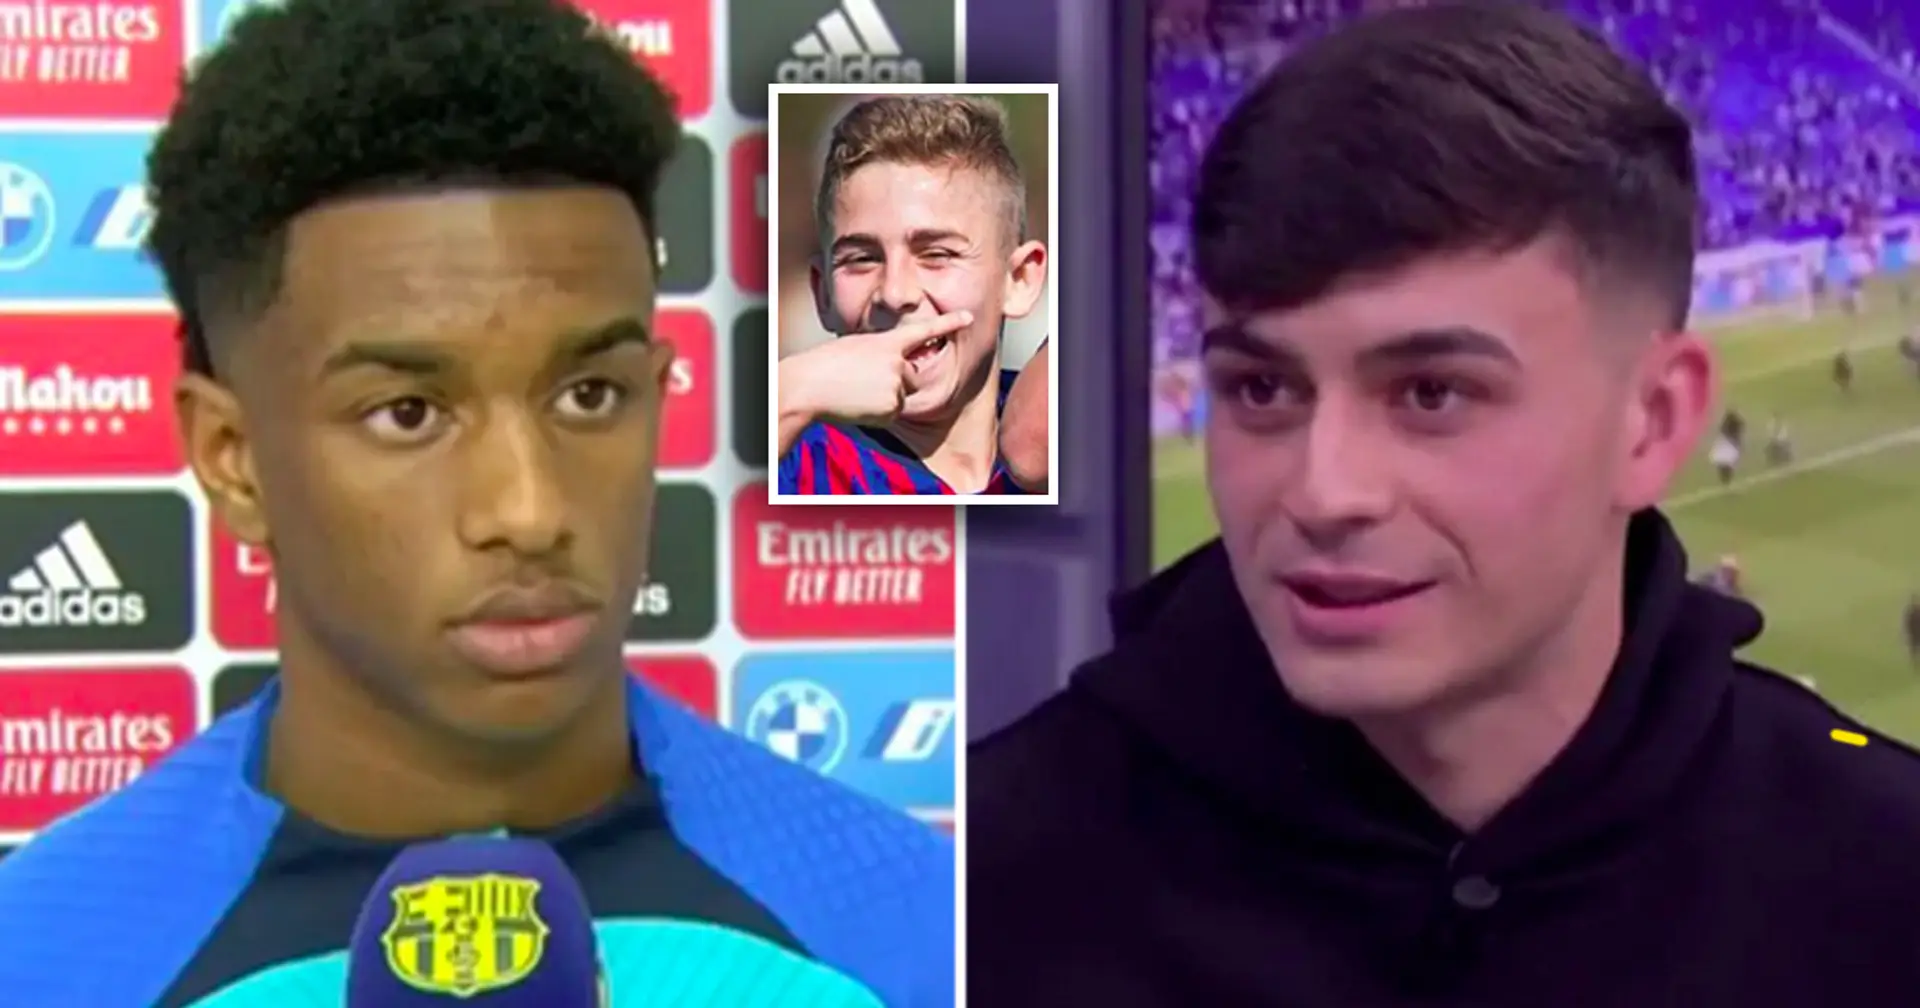 Barca 'surprised' with one emerging young talent – Pedri and Balde publicly praised him